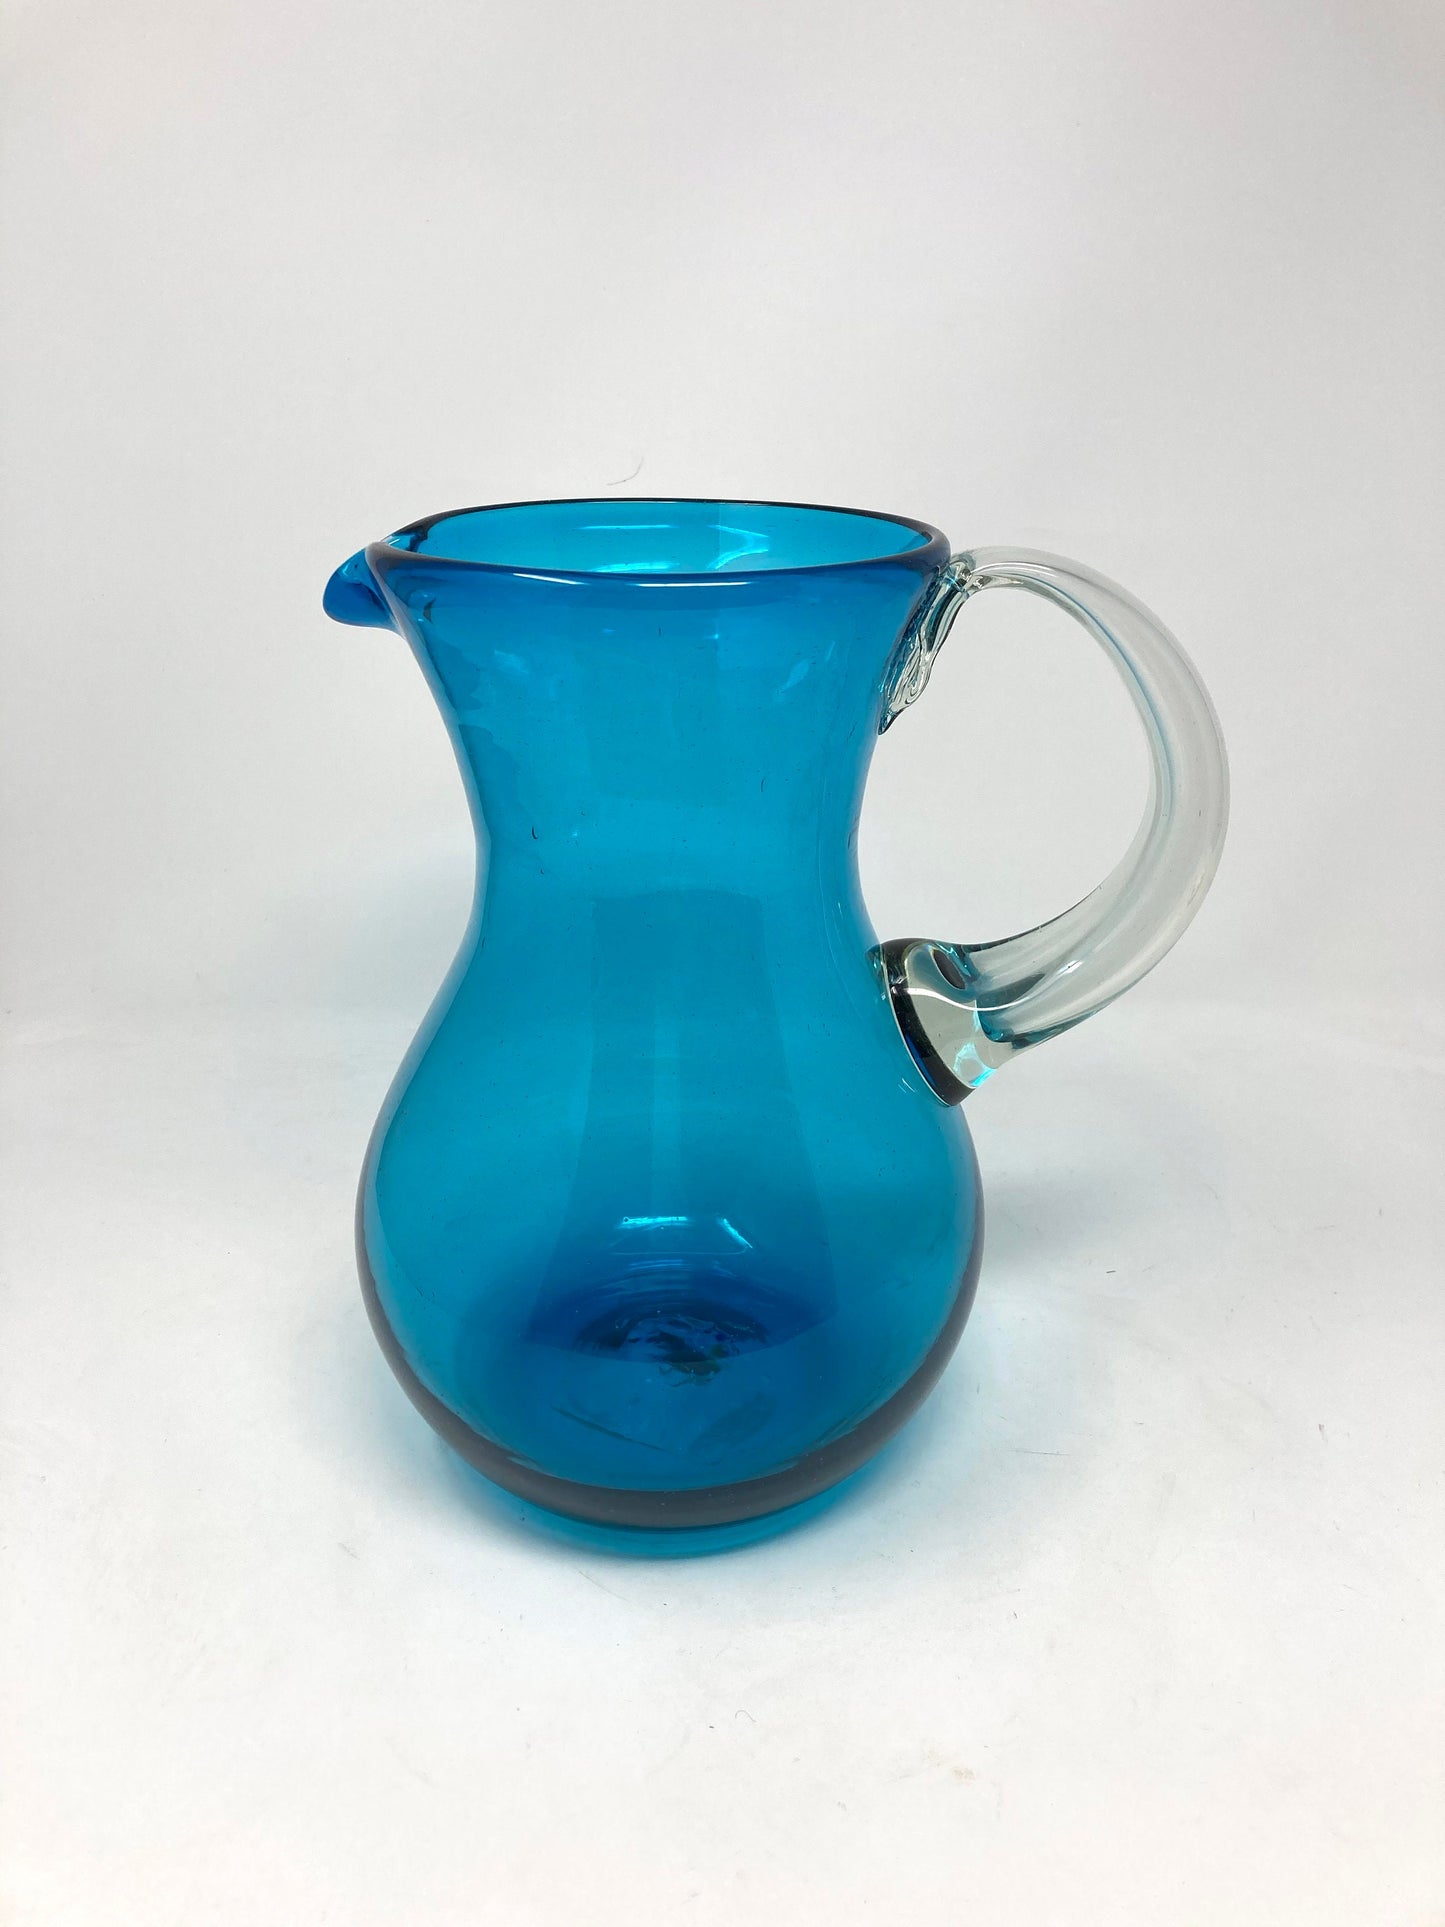 80 oz Hand Blown Glass Pitcher - HG Solid Turquoise